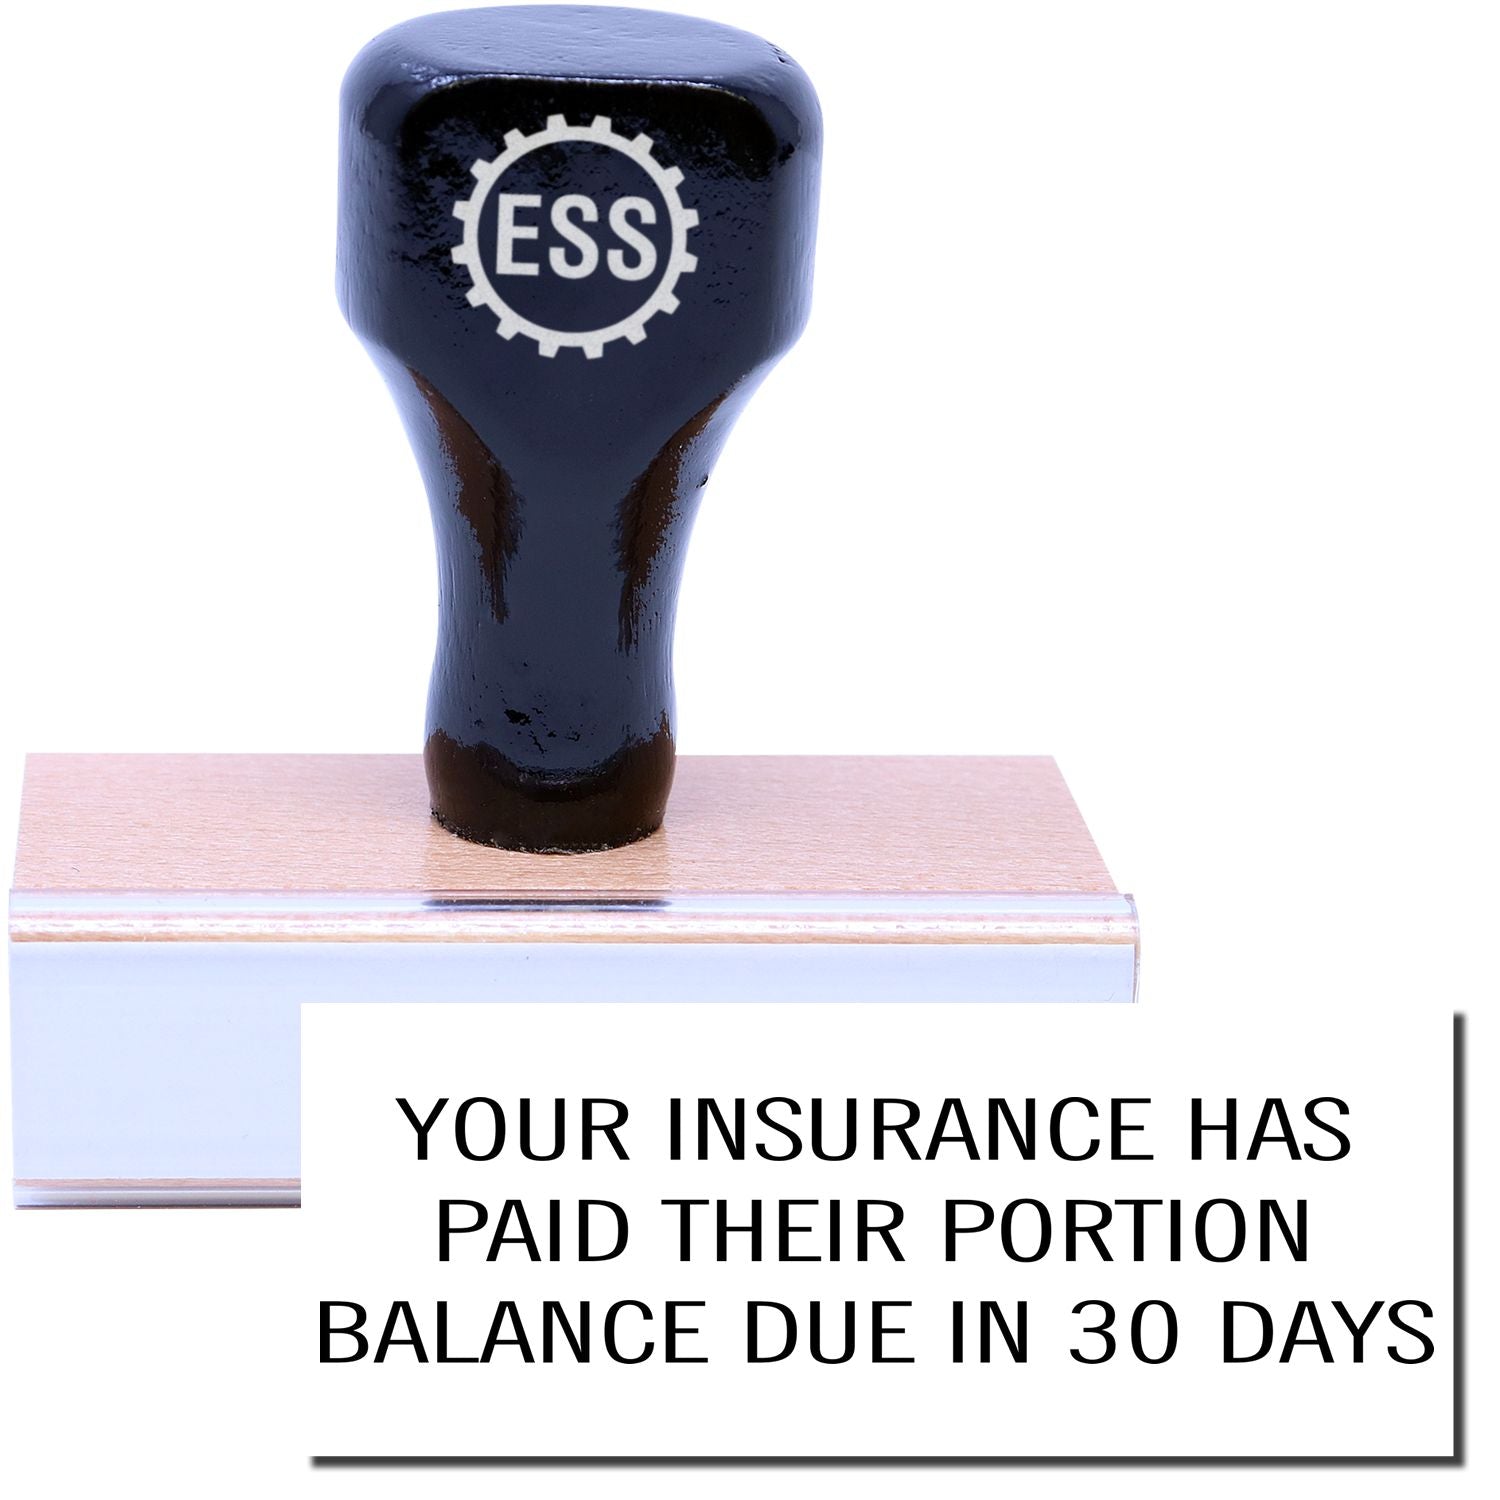 A stock office rubber stamp with a stamped image showing how the text "YOUR INSURANCE HAS PAID THEIR PORTION BALANCE IS DUE IN 30 DAYS" is displayed after stamping.